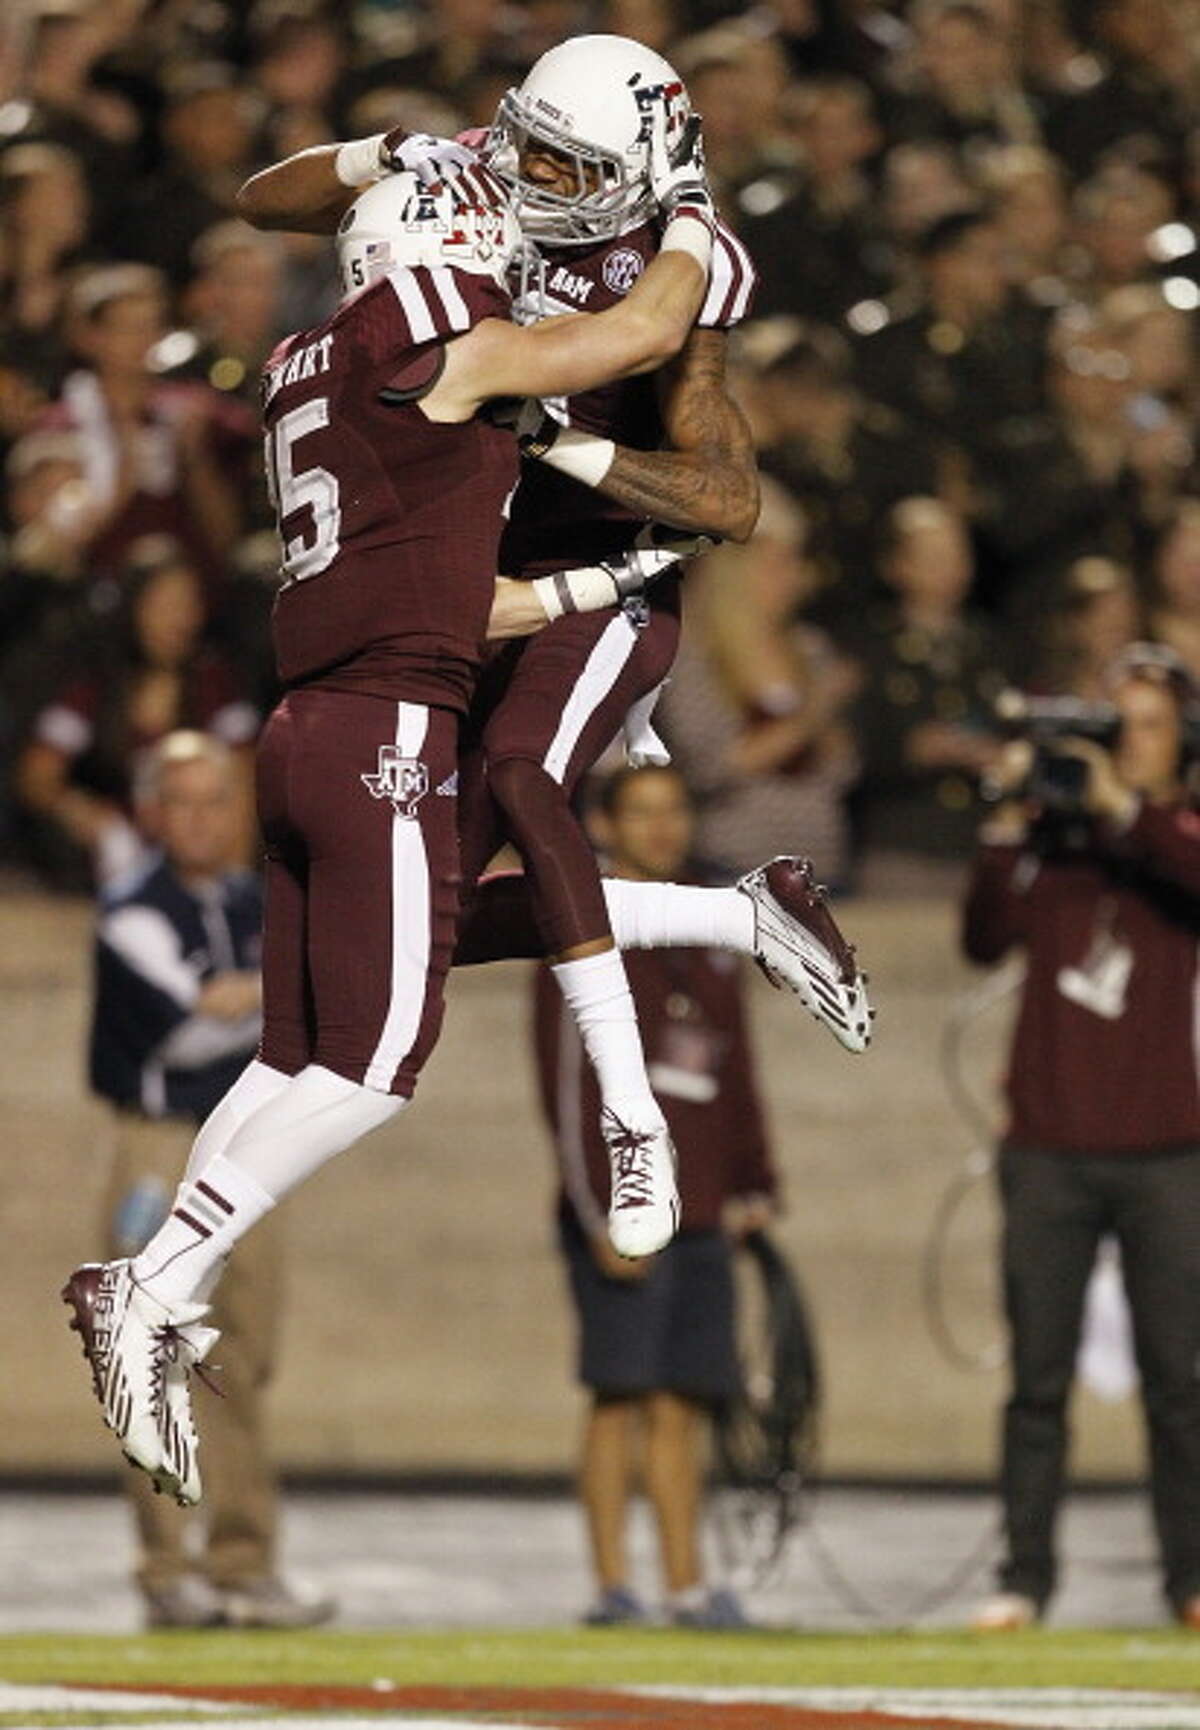 Travis Labhart #15 of the Texas A&M Aggies celebrates with Mike Evans #13 after scoring in the first quarter against the UTEP Miners at Kyle Field on November 2, 2013 in College Station, Texas.